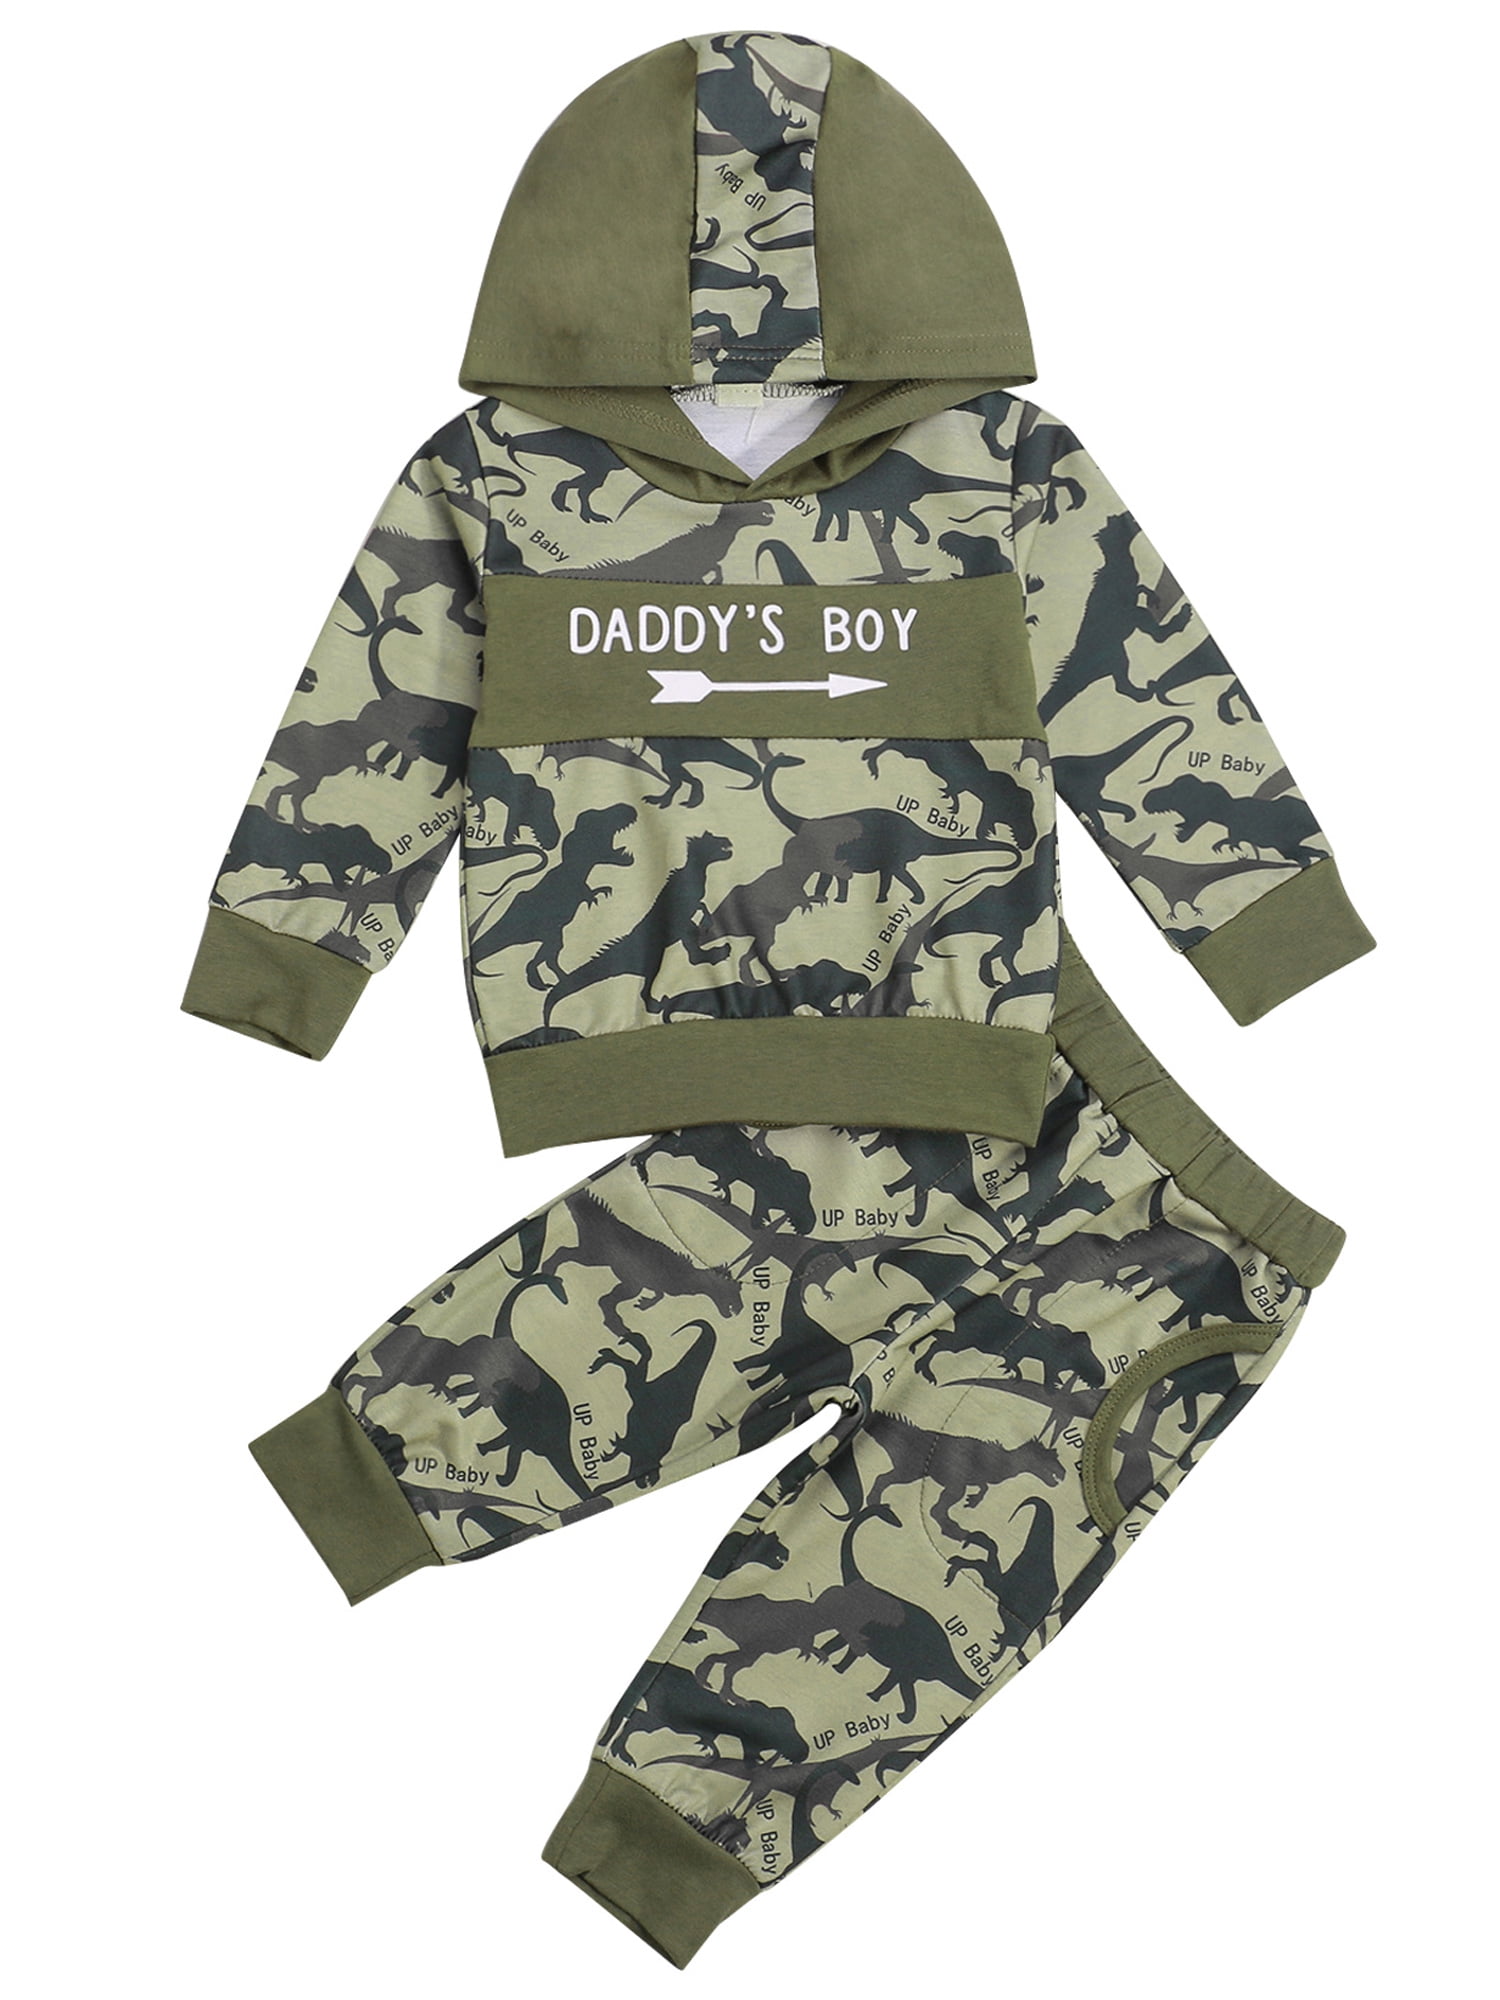 Infant Baby Boys Girls Pants Set Camouflage Hoodie Tops Long Sleeve Sweatshirt+Long Pants Daddy's Boy Outfits Fall Winter Clothes